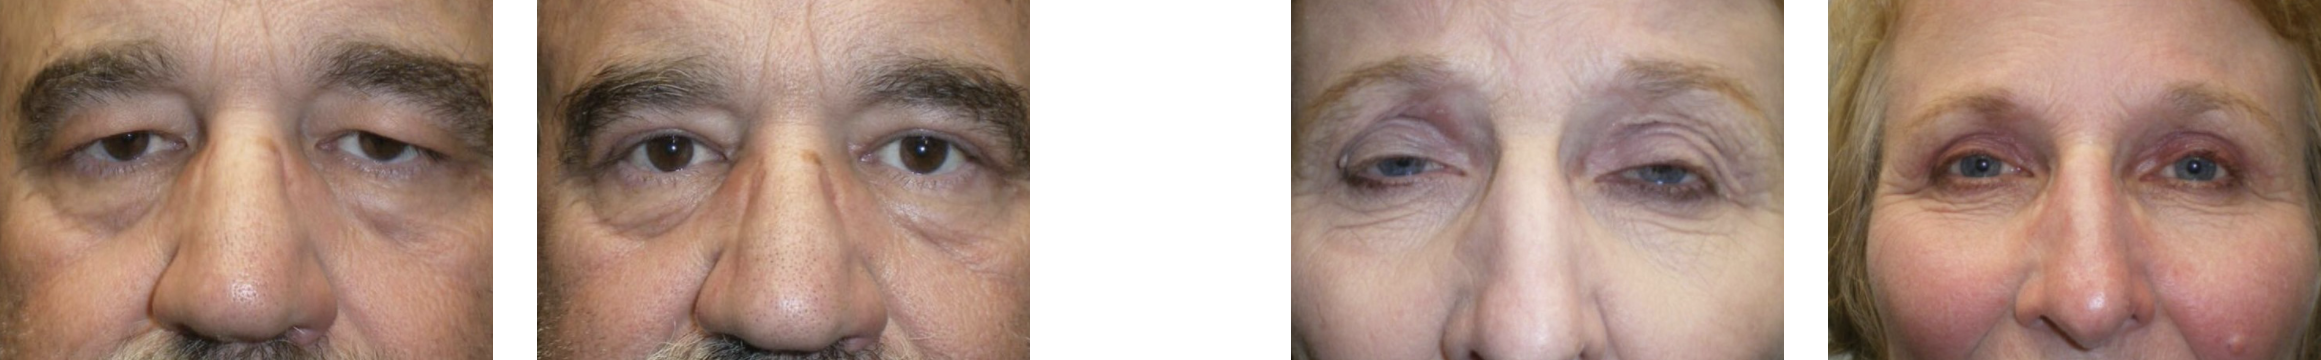 Examples of functional blepharoplasty covered by insurance